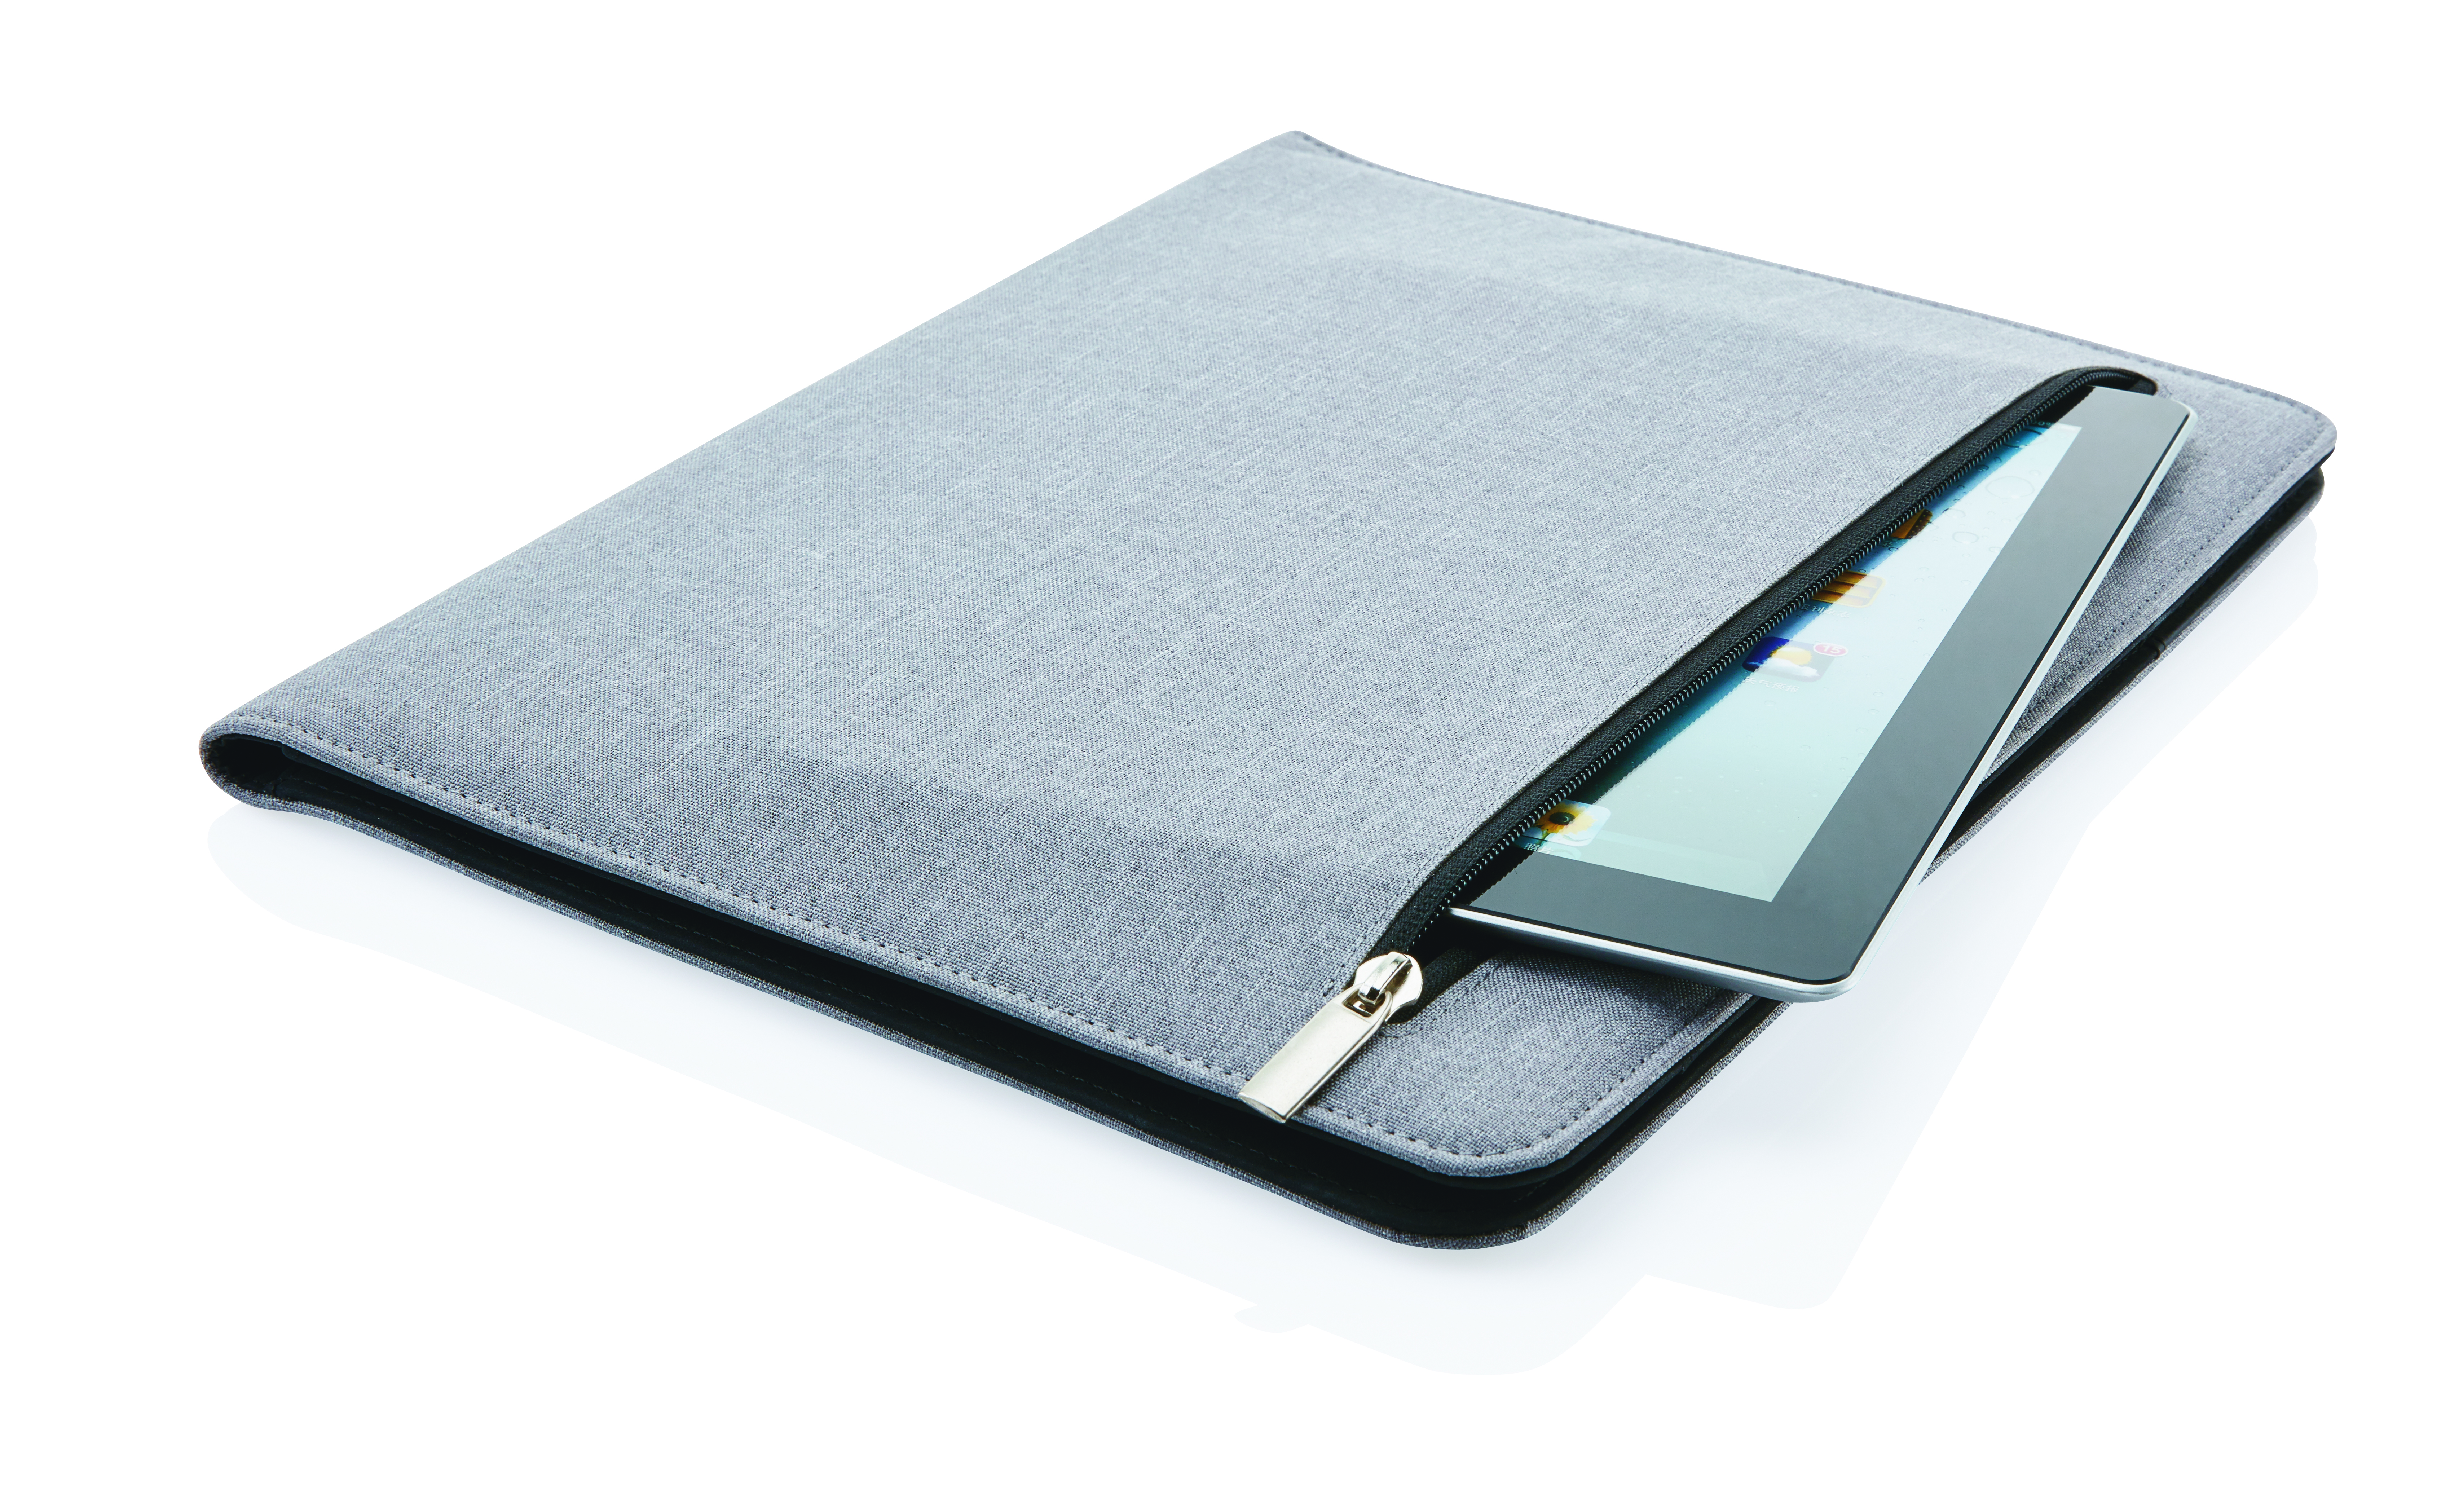 A Barcombe portfolio case made from linen with a zip-up design, specifically designed for carrying tech devices - Alton